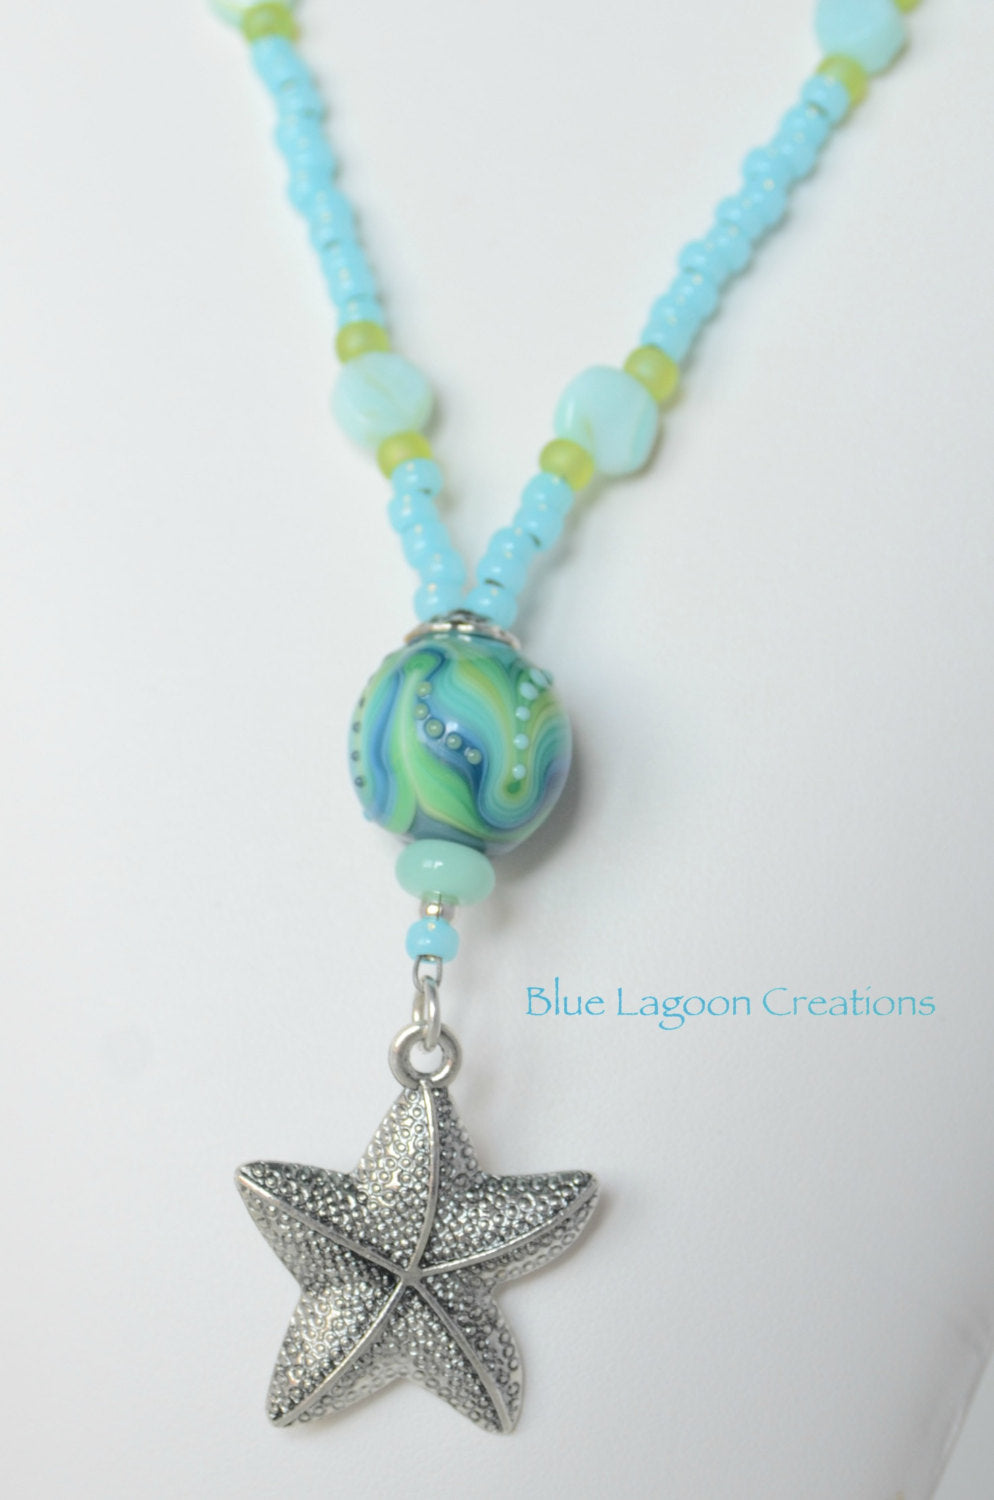 Green and Blue Starfish Pendant Necklace with Lampwork Bead by Michal Silberberg